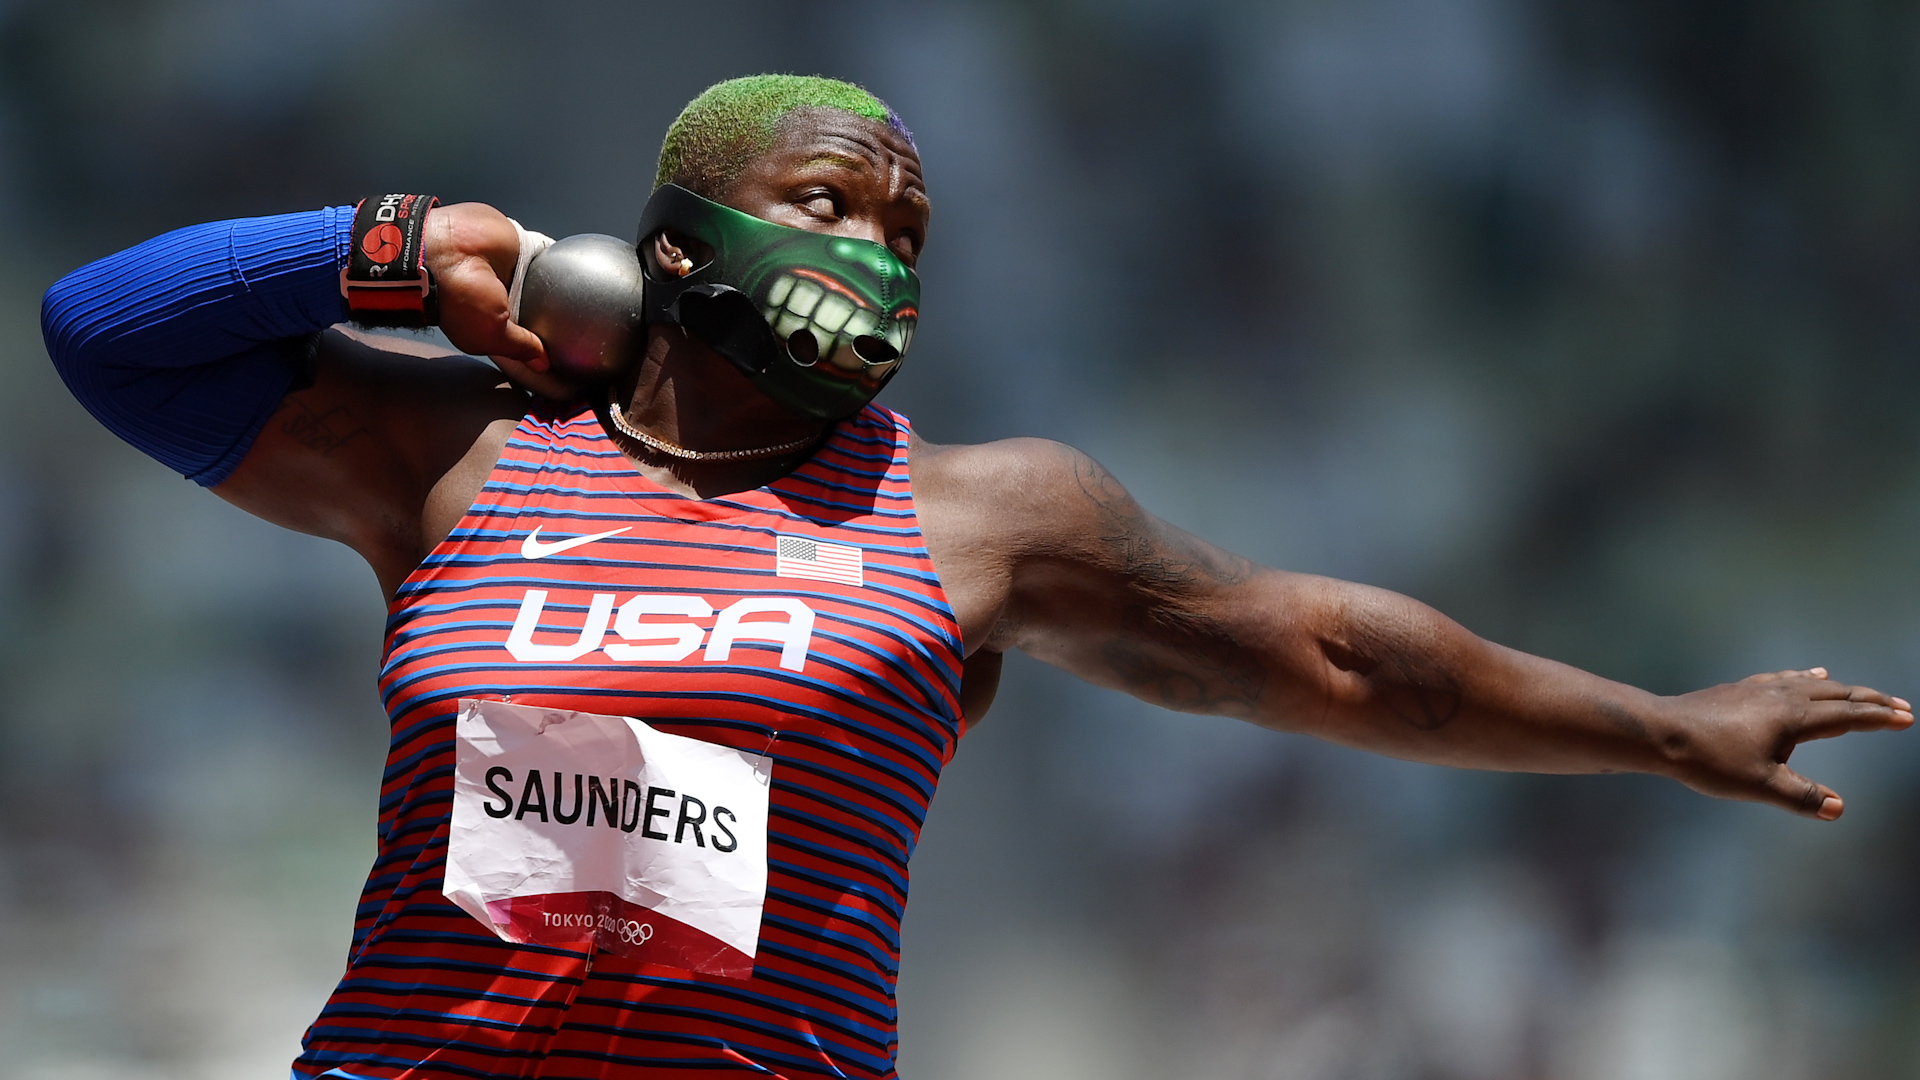 Team USA's Raven Saunders Takes Silver in Women's Shot Put, China's Gong  Lijiao Takes Gold